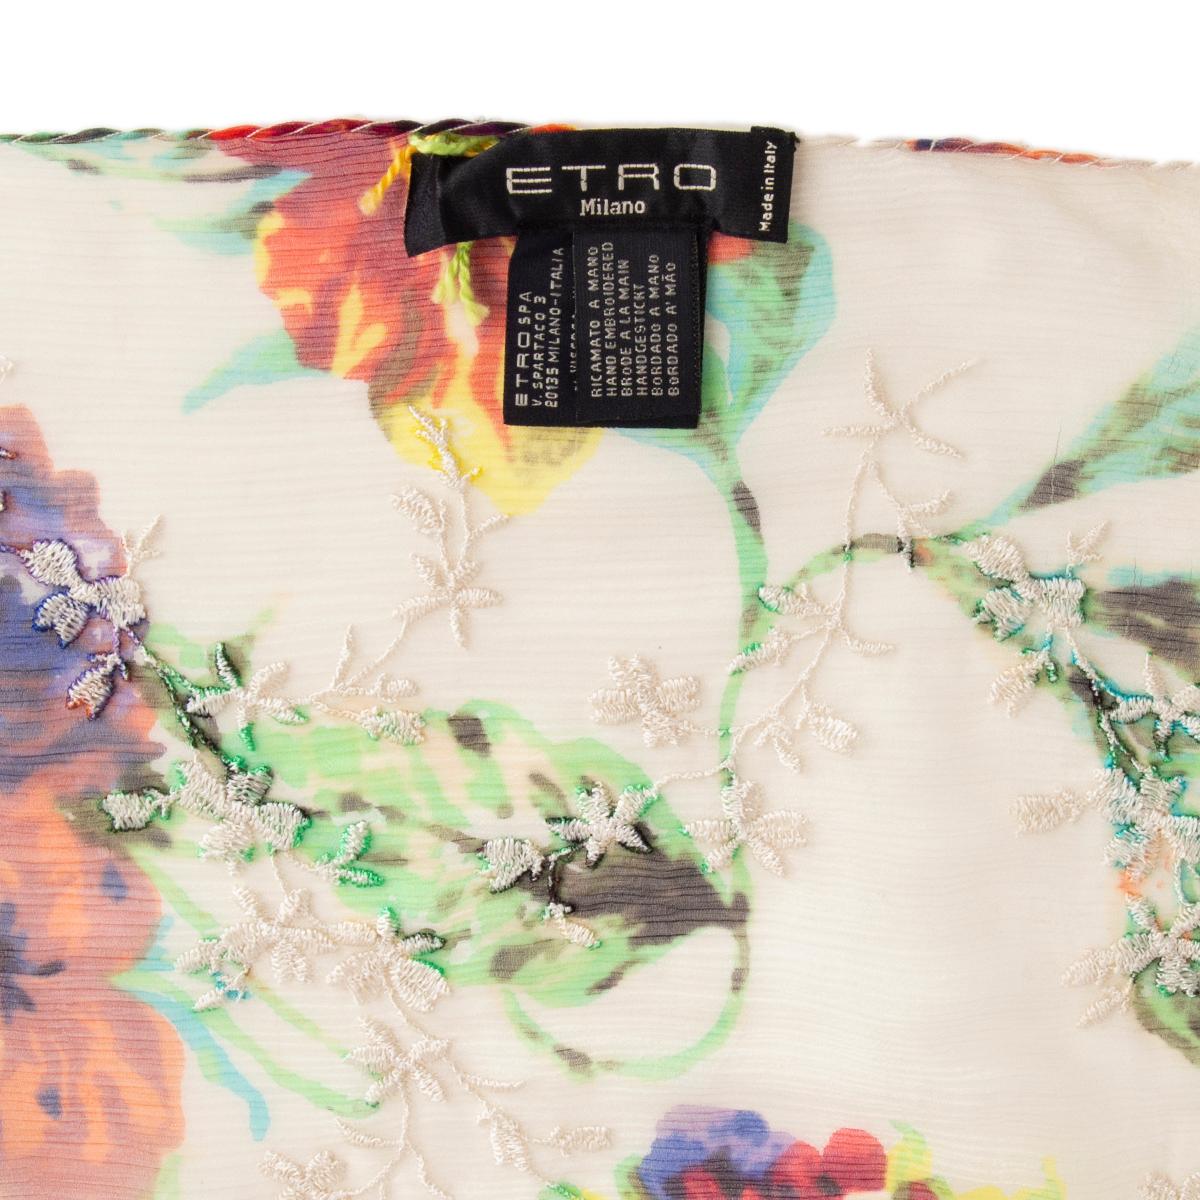 Etro off-white crepe scarf in viscose (54%), cotton (24%) and silk (22%) with multicolor floral-print, white floral embroidered and beaded tassel trim. Has been worn and is in excellent condition.

Width 65cm (25.4in)
Length 180cm (70.2in)